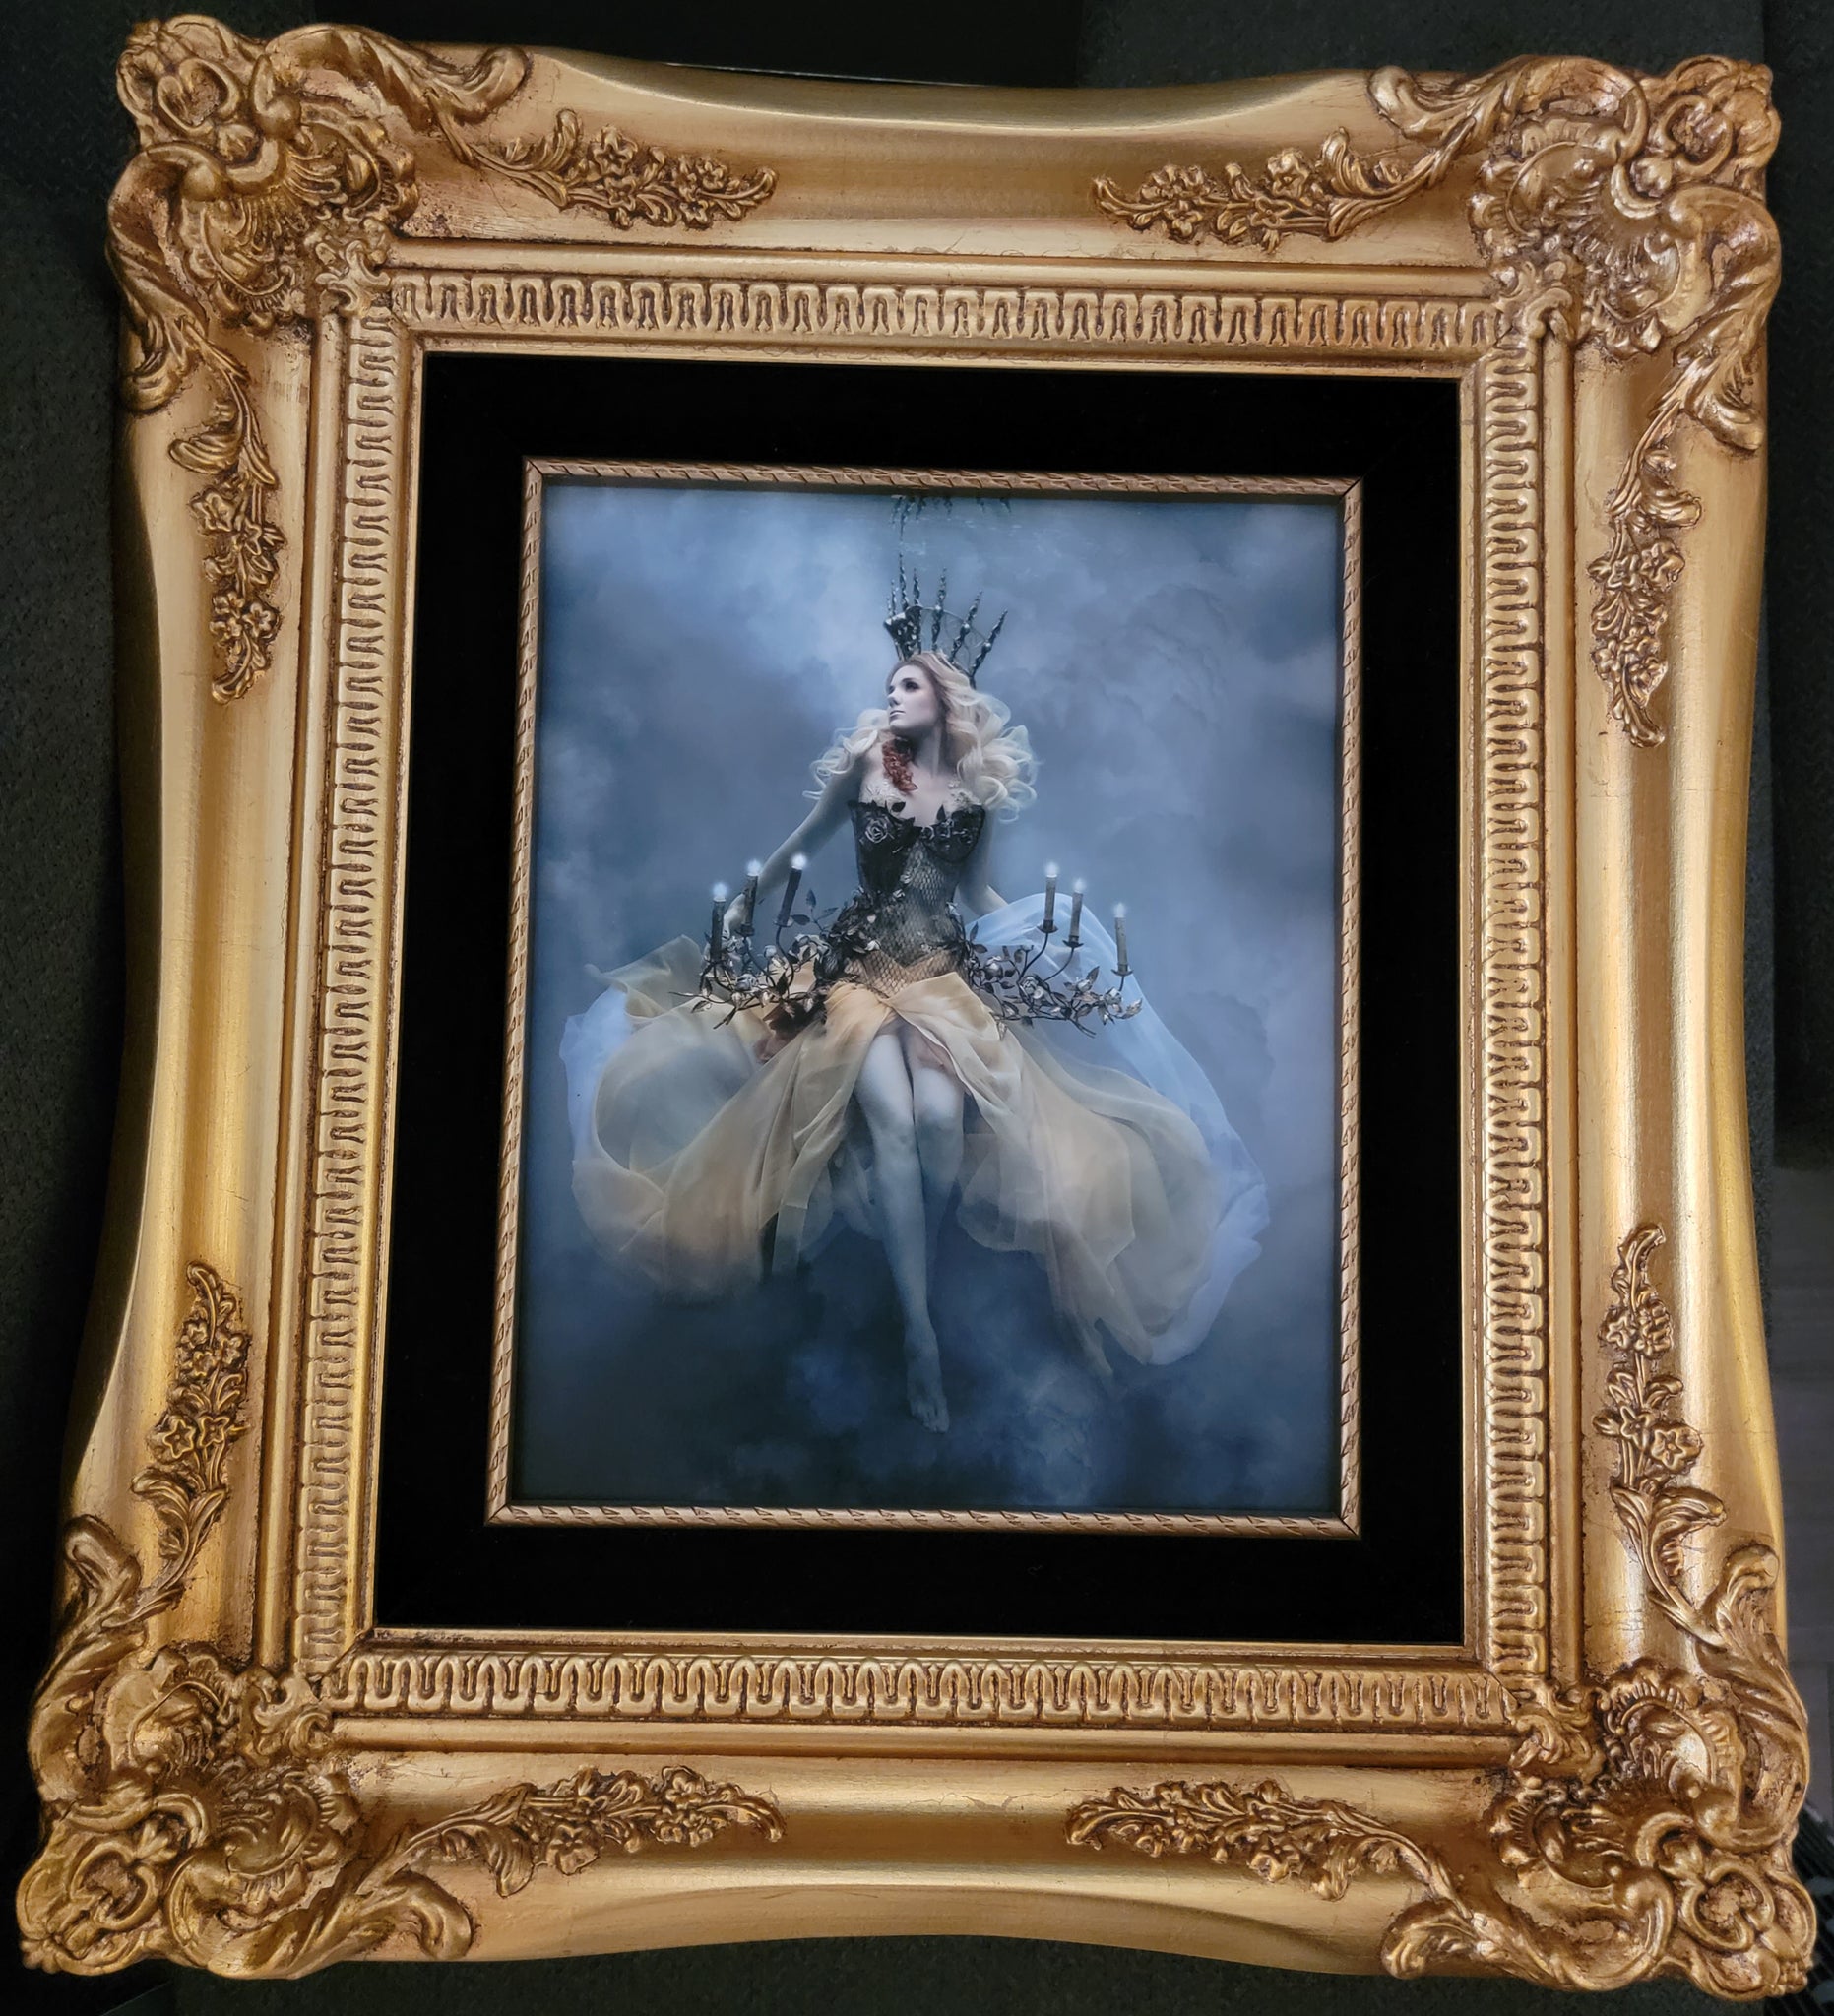 8x10 Limited Edition Fine Art Print in Vintage Gold solid wood Frame